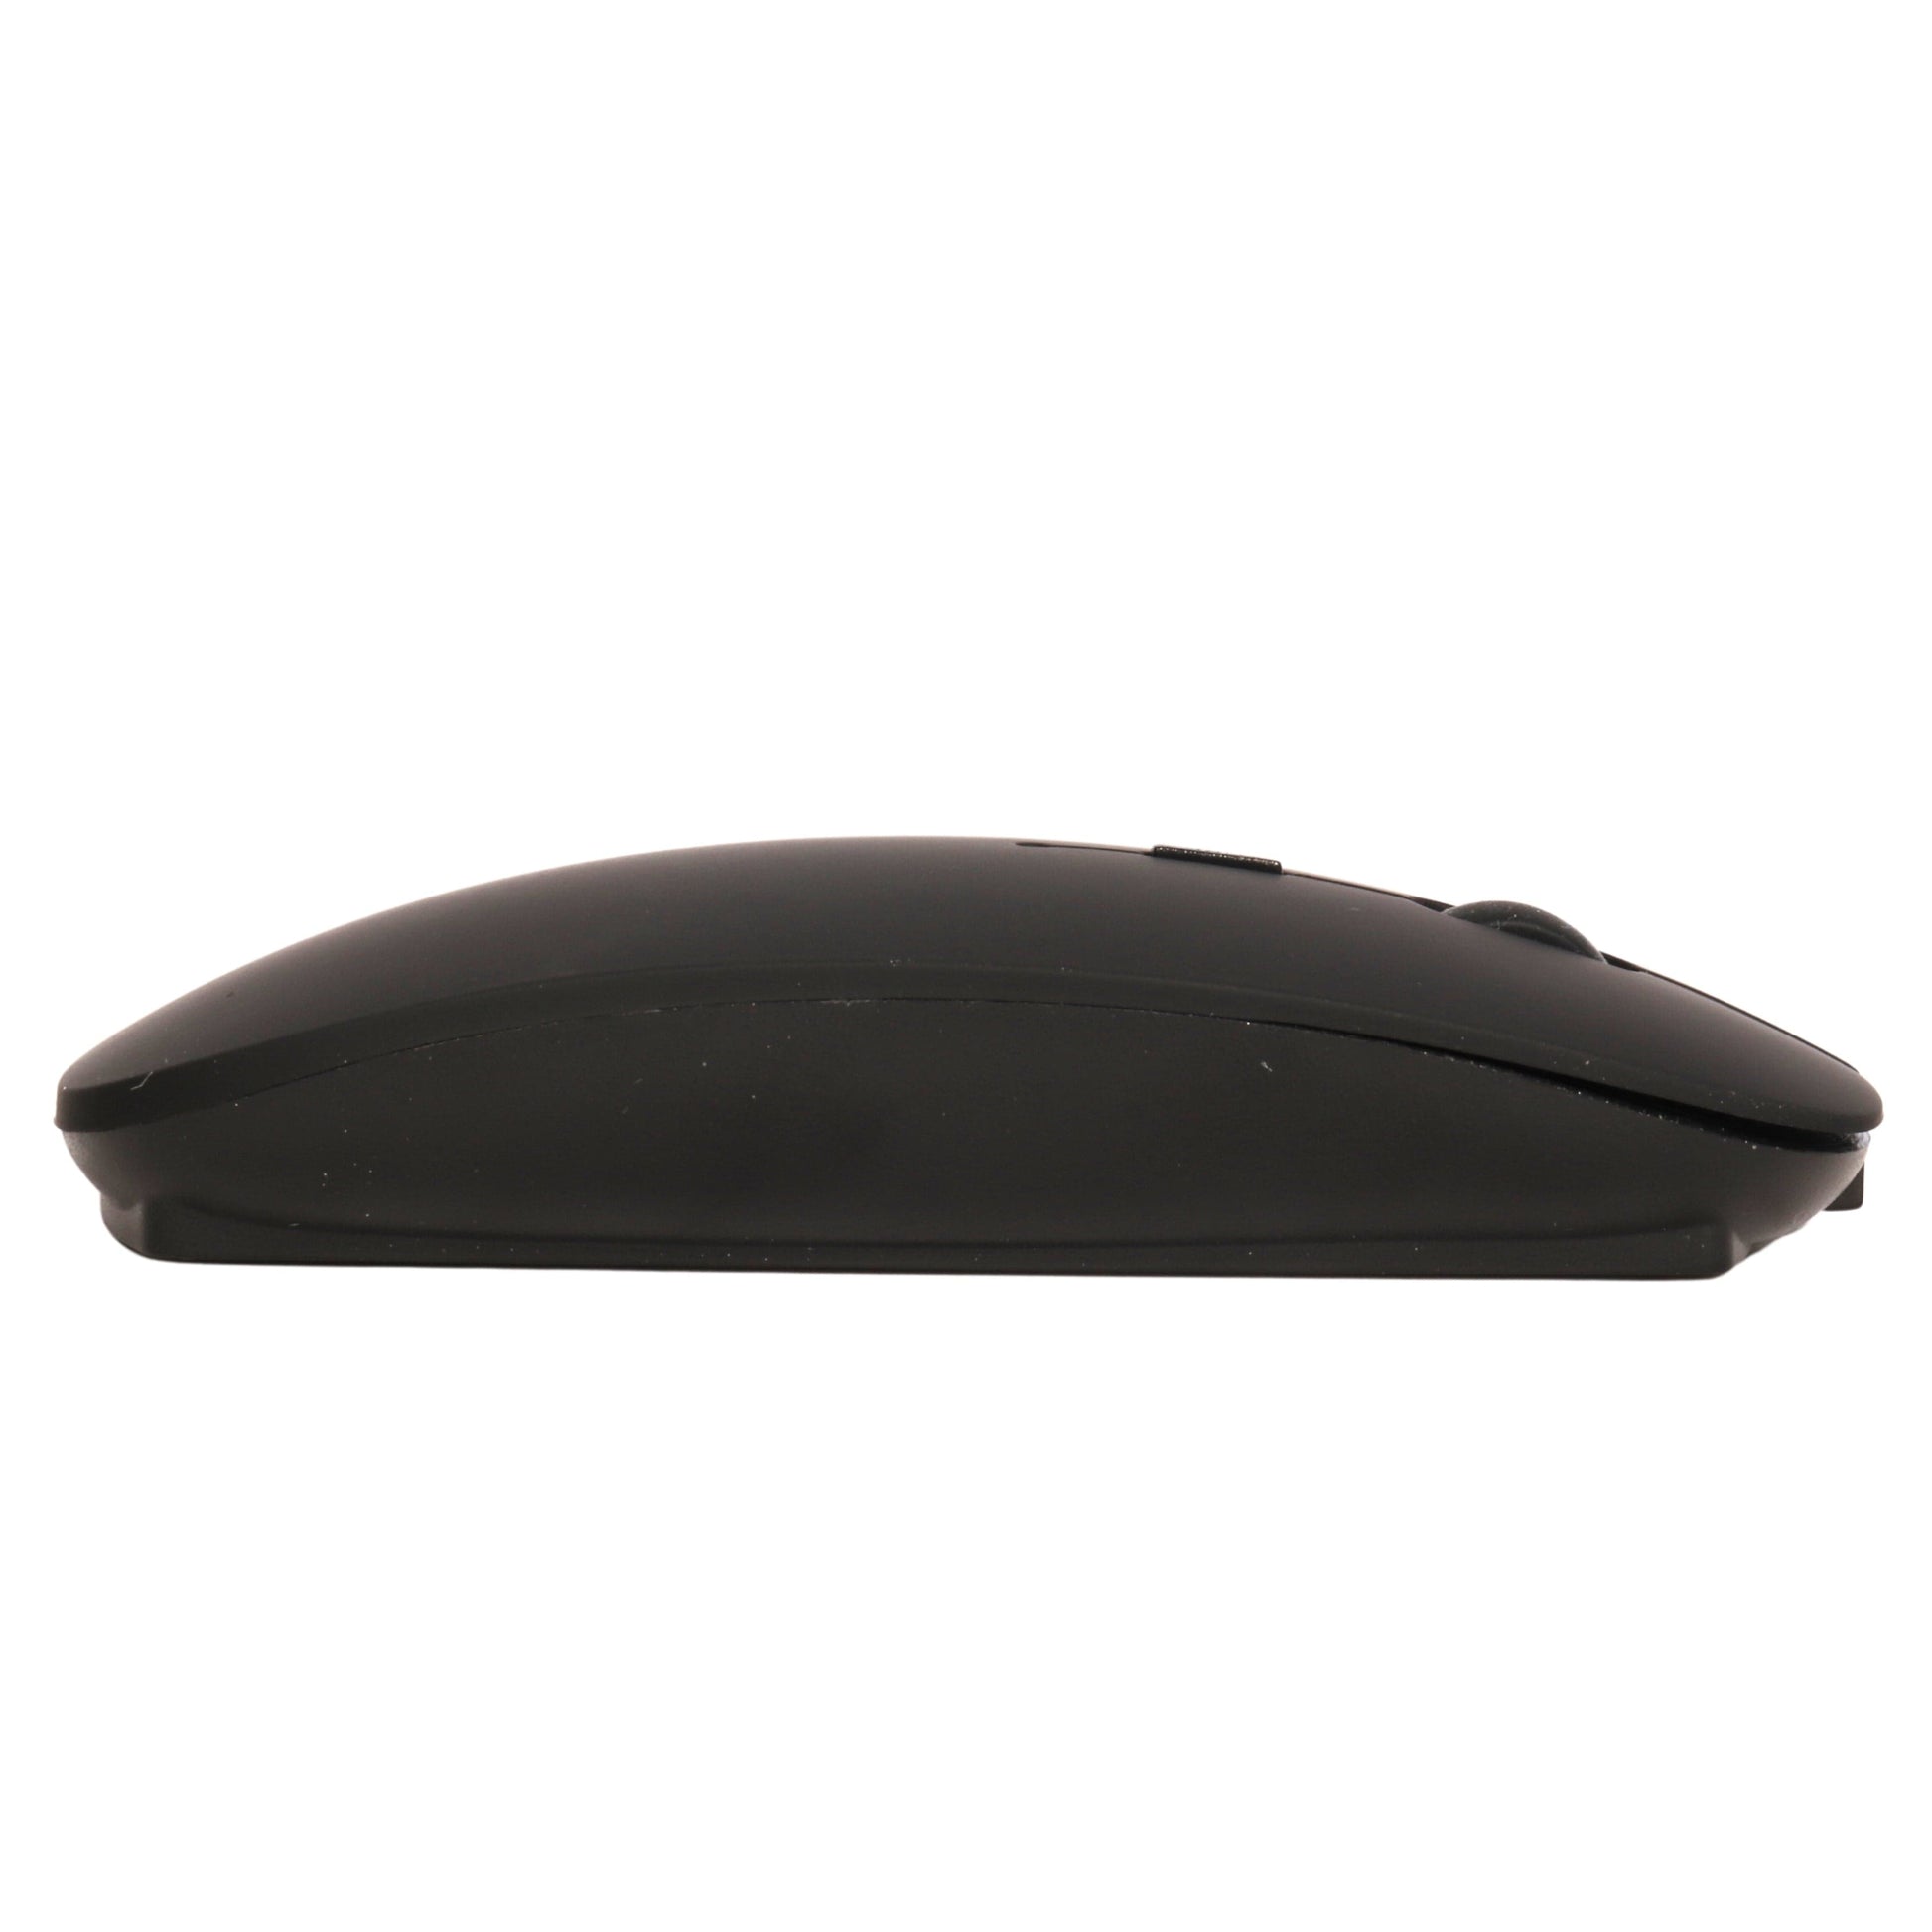 BRANDS & BEYOND Laptops & Accessories Black Wirless Mouse